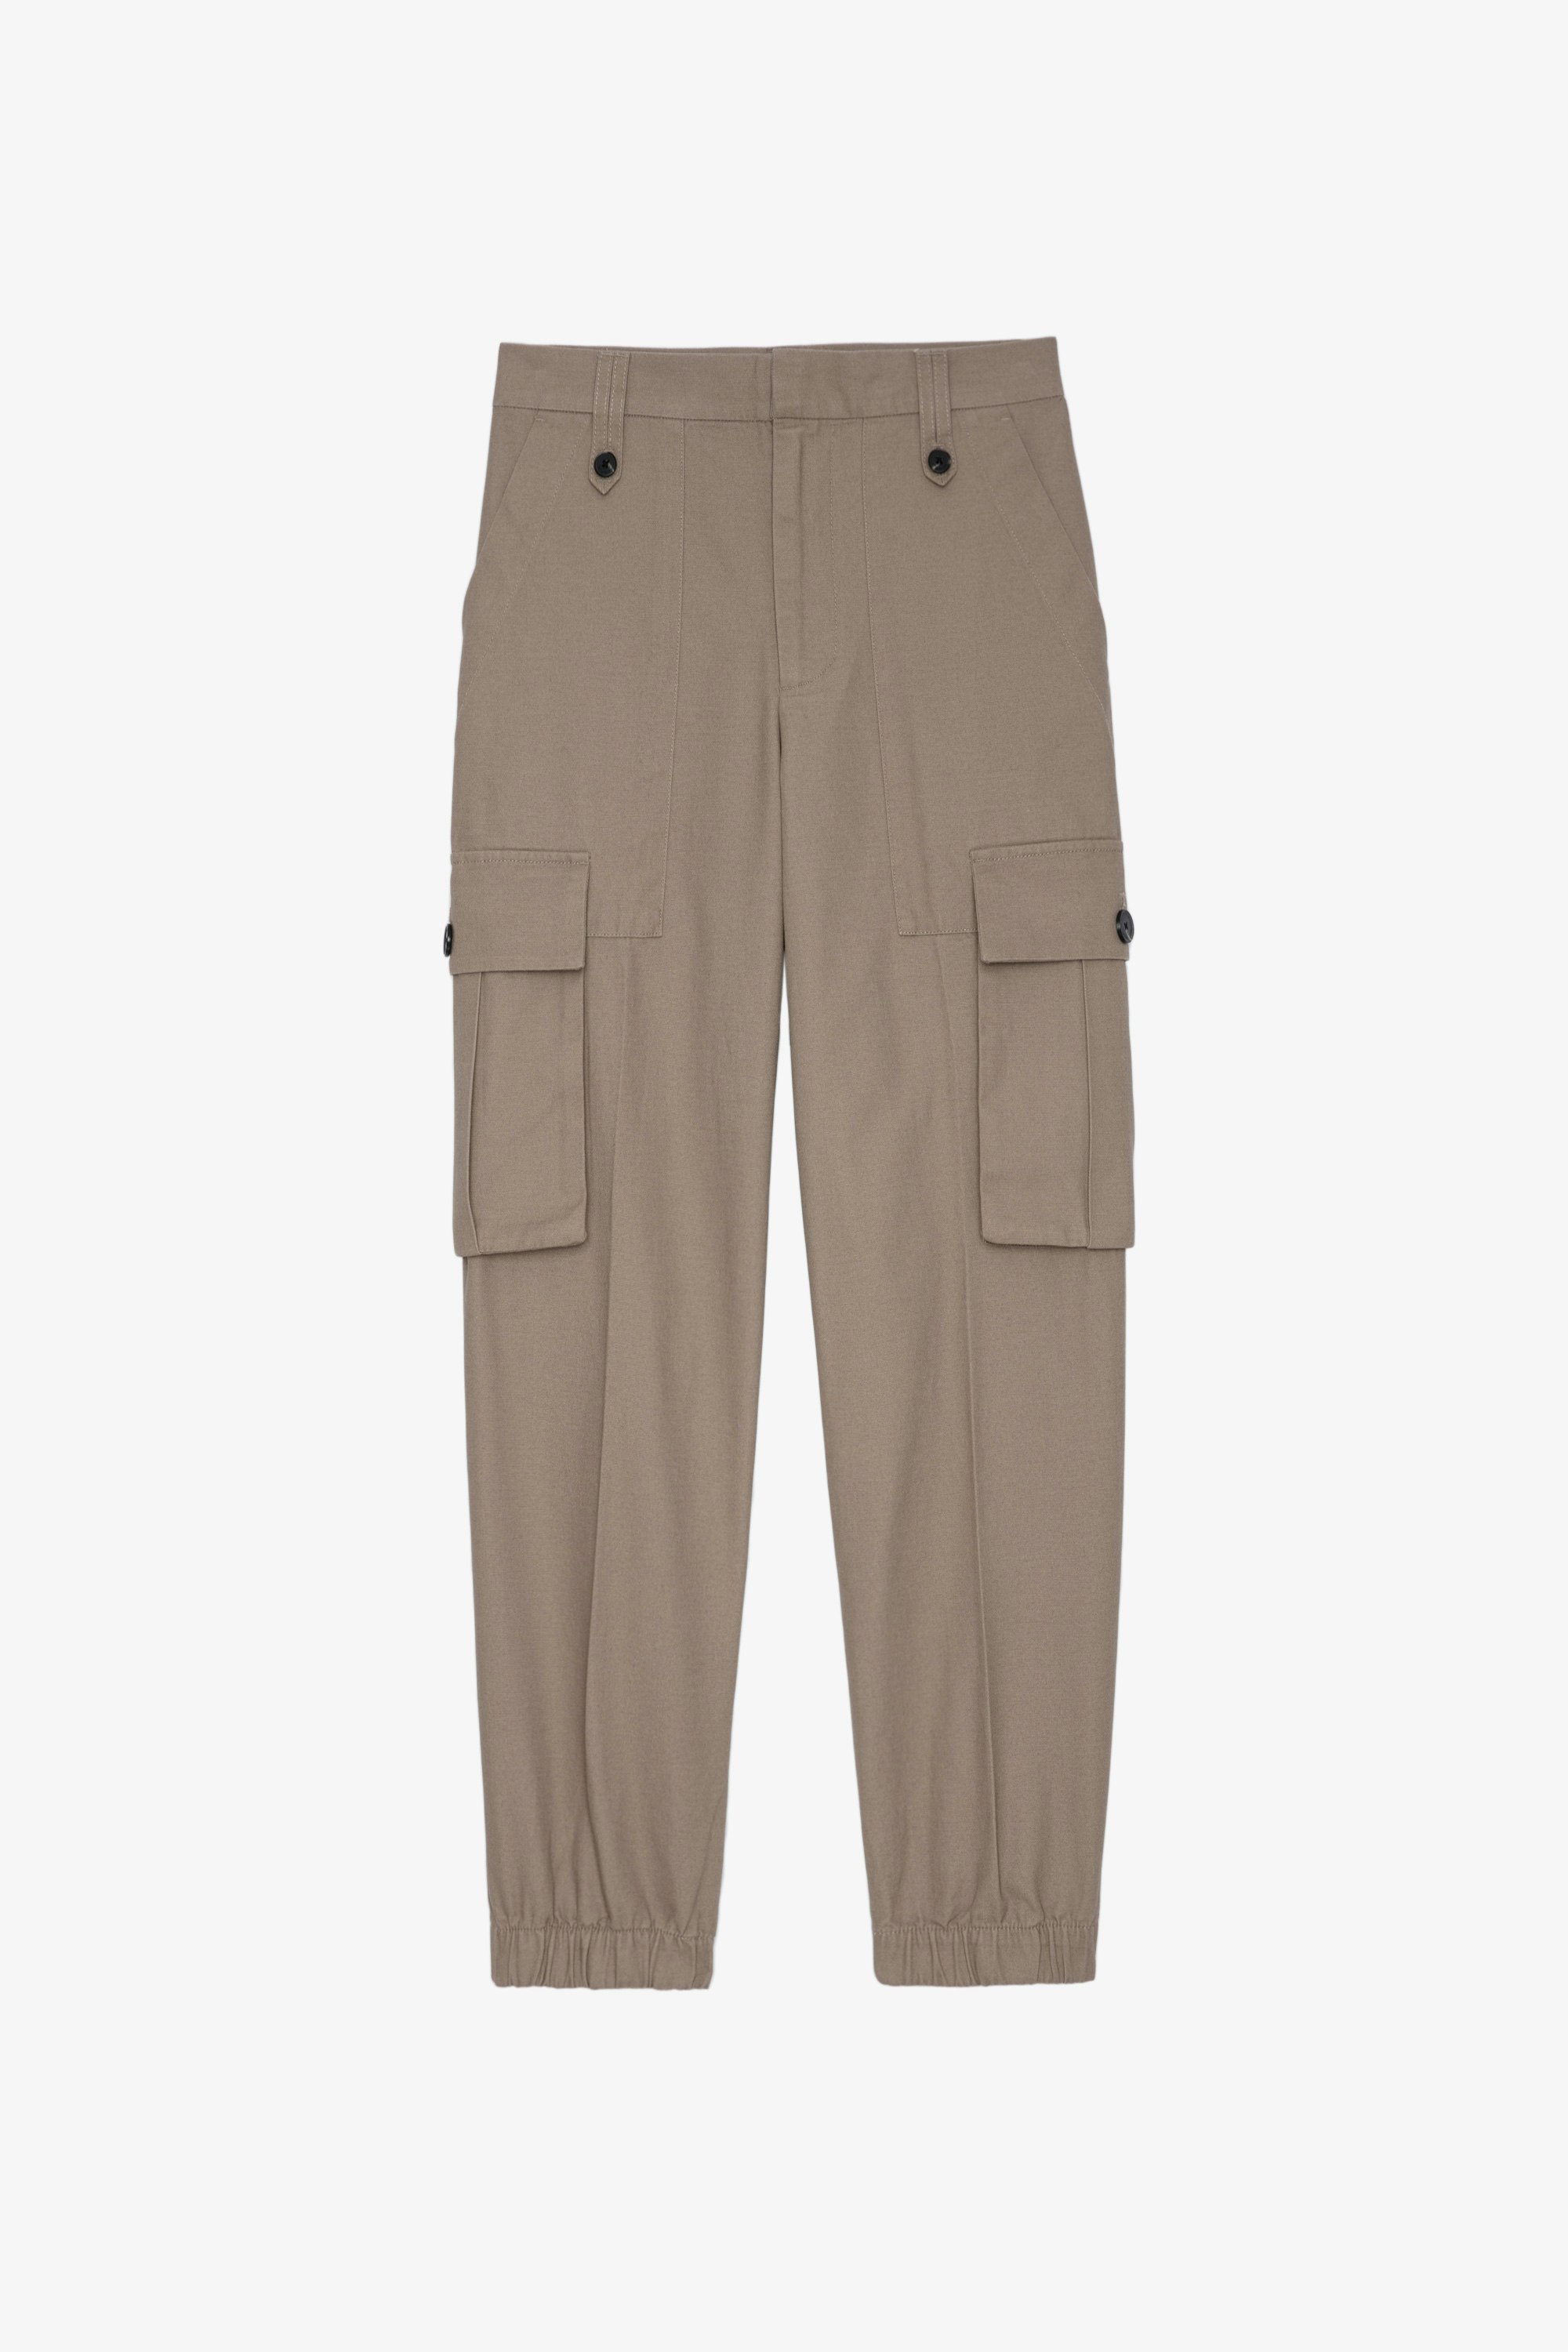 Pilote Canvas パンツ Women's cognac cotton trousers with cargo pockets